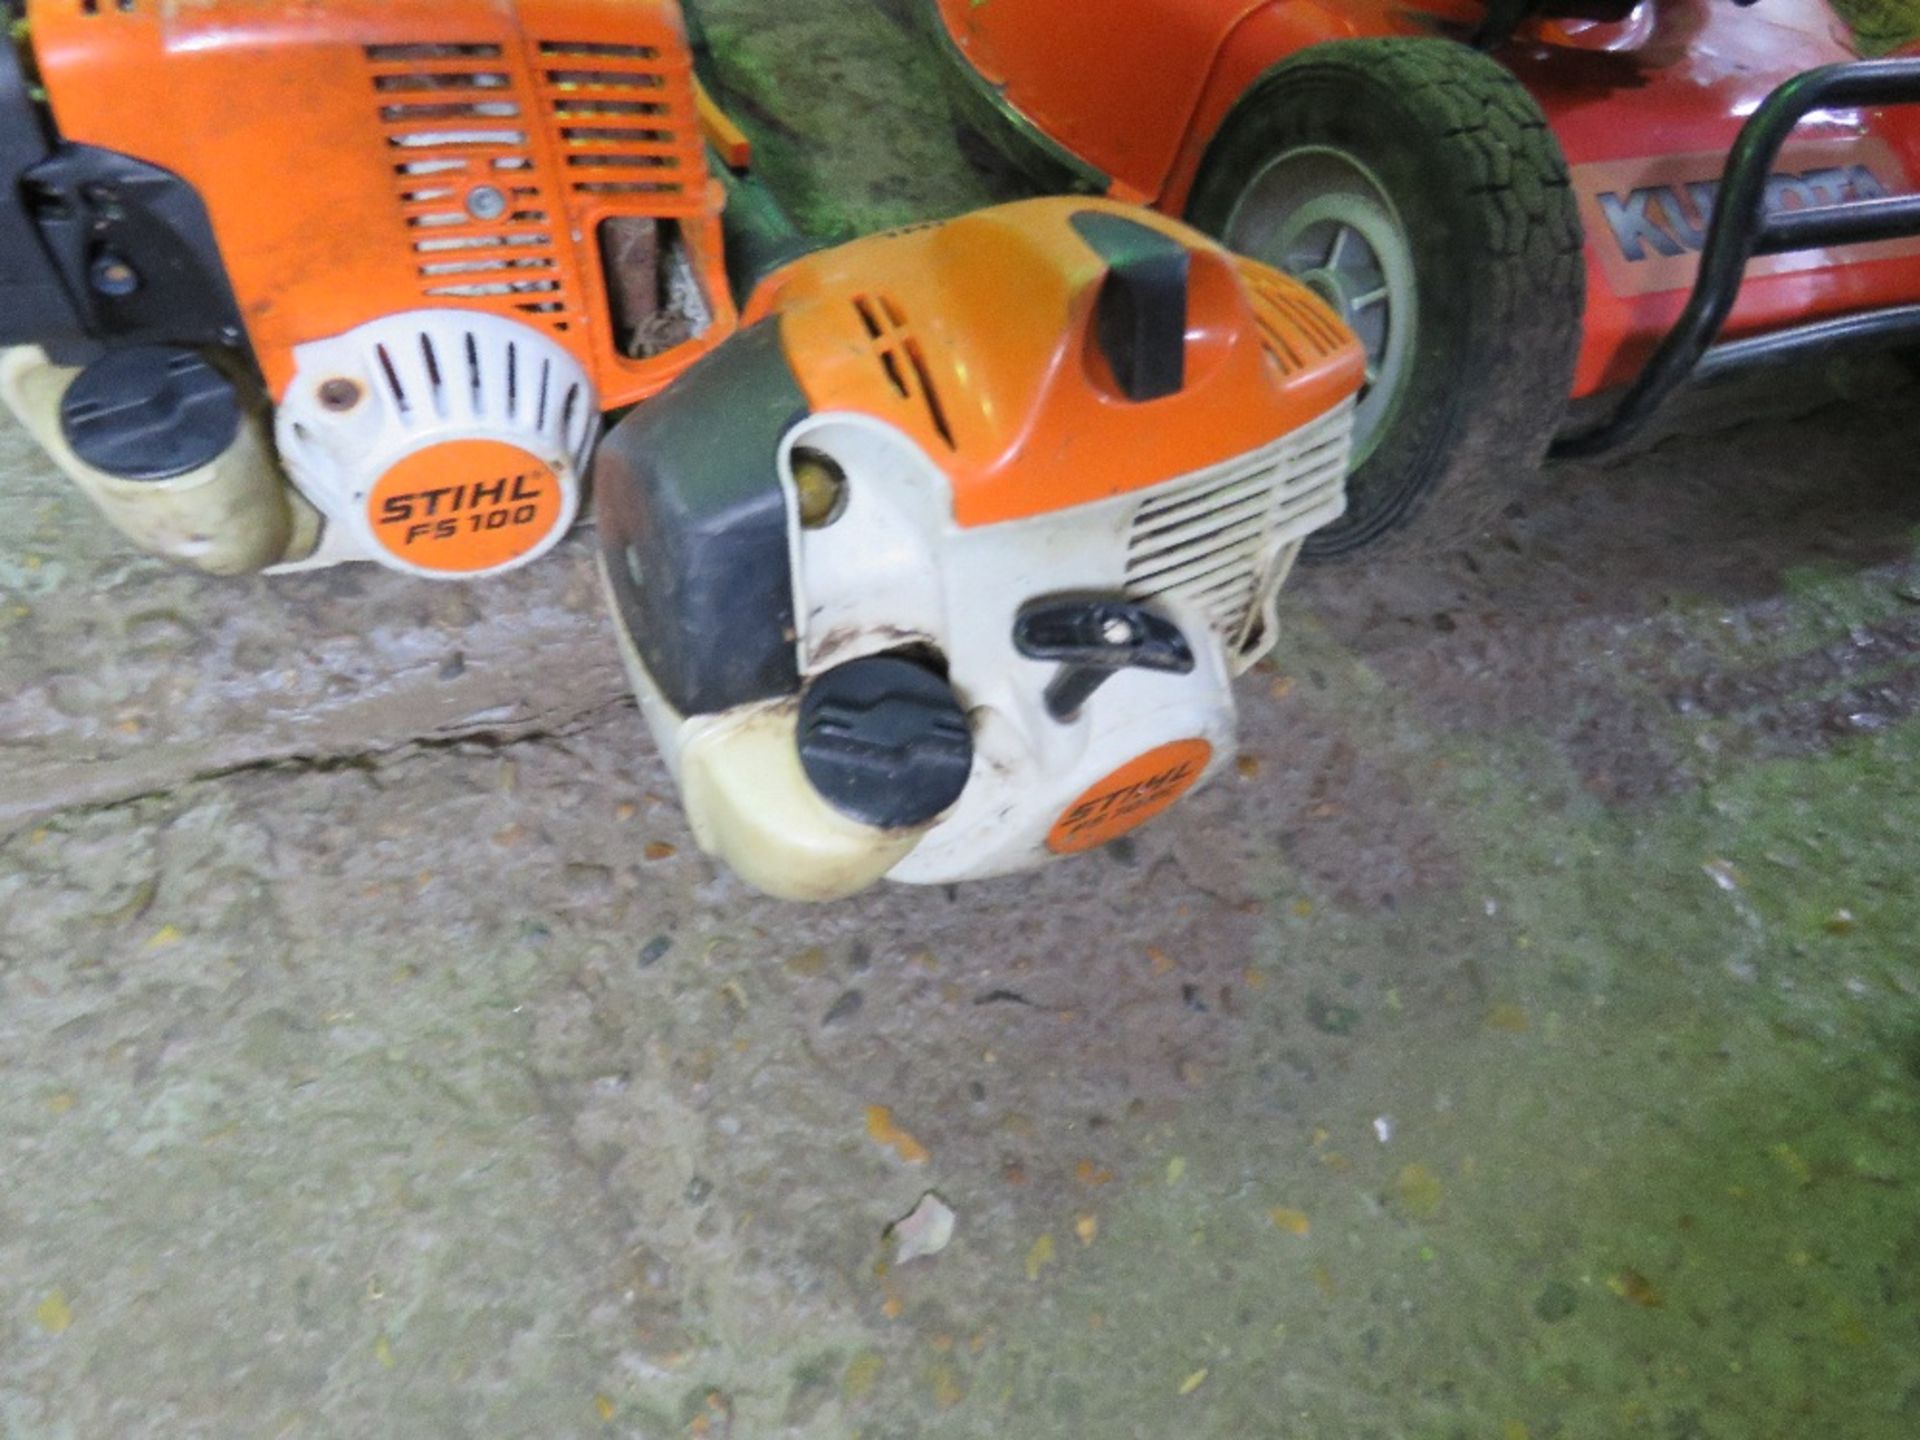 2 X STIHL PETROL ENGINED STRIMMERS: ONE HAS A BENT/DAMAGED SHAFT. THIS LOT IS SOLD UNDER THE AUCTION - Image 2 of 4